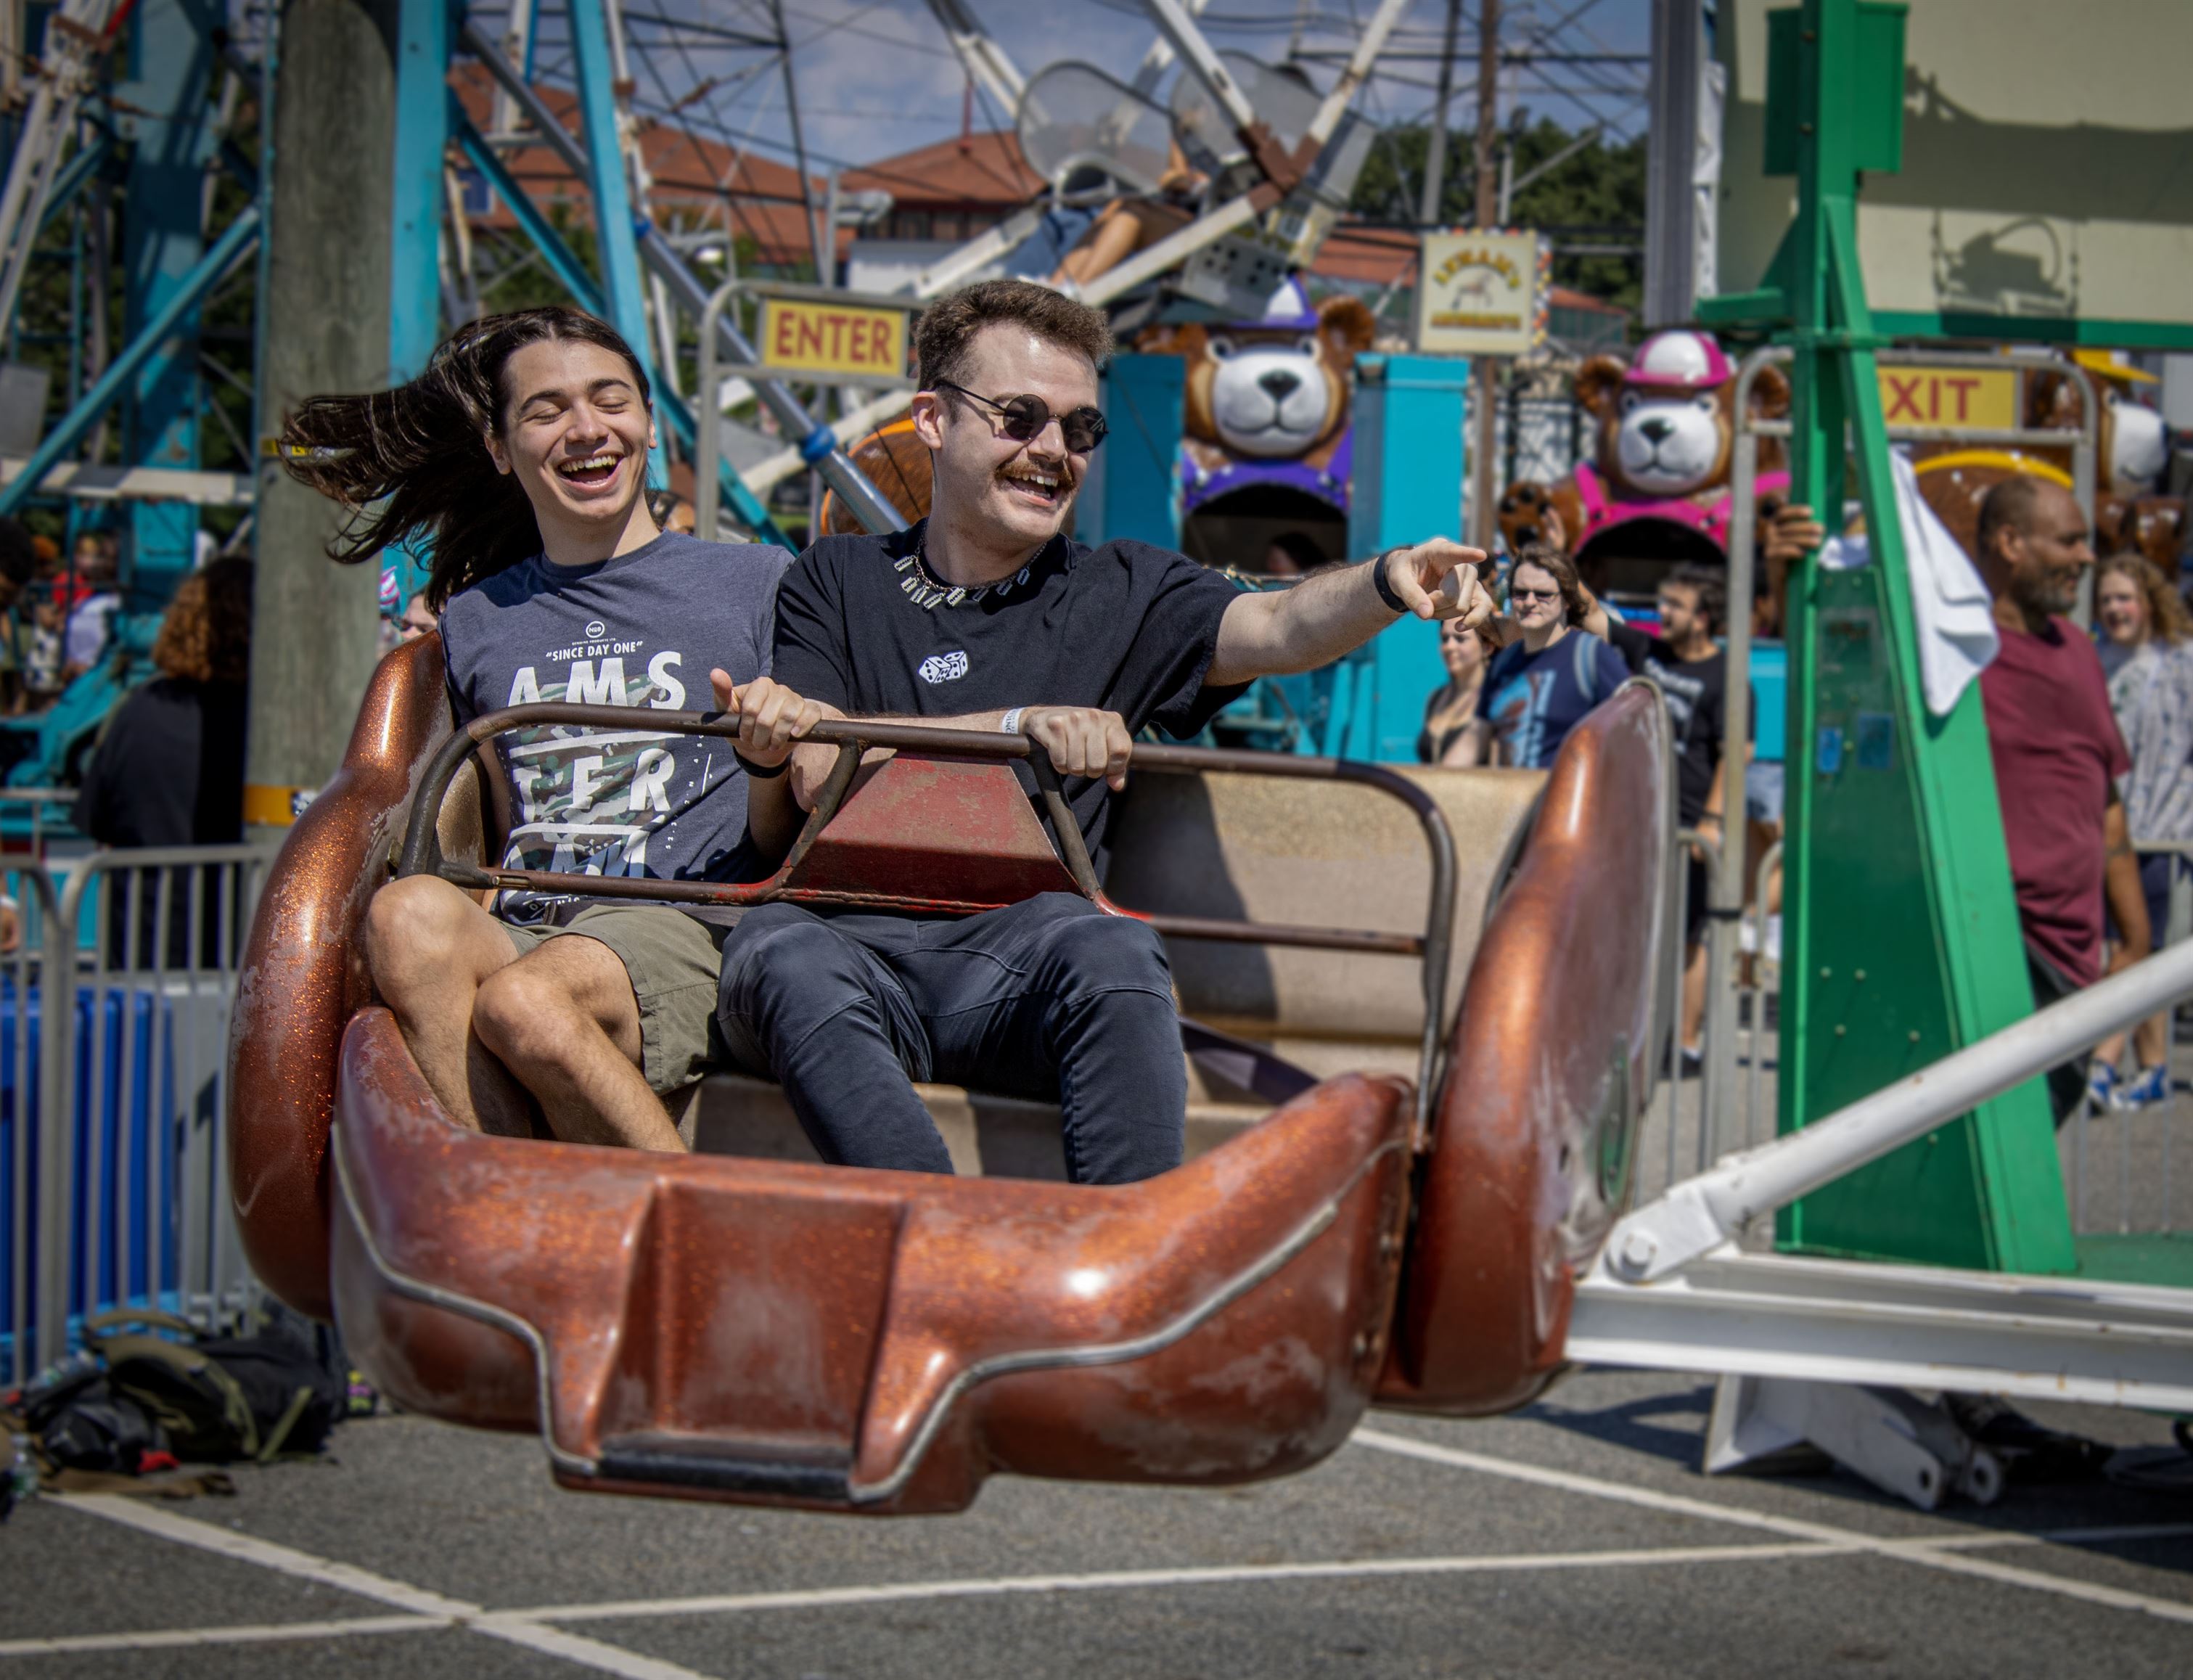 MONTCLAIR, NJ 08/27/2023 MONTCLAIR STATE UNIVERSITY CARNIVAL:  People laughing and smiling while on a ride at the Montclair State University Carnival, on sunday the 27th. - photo by Dani Mazariegos